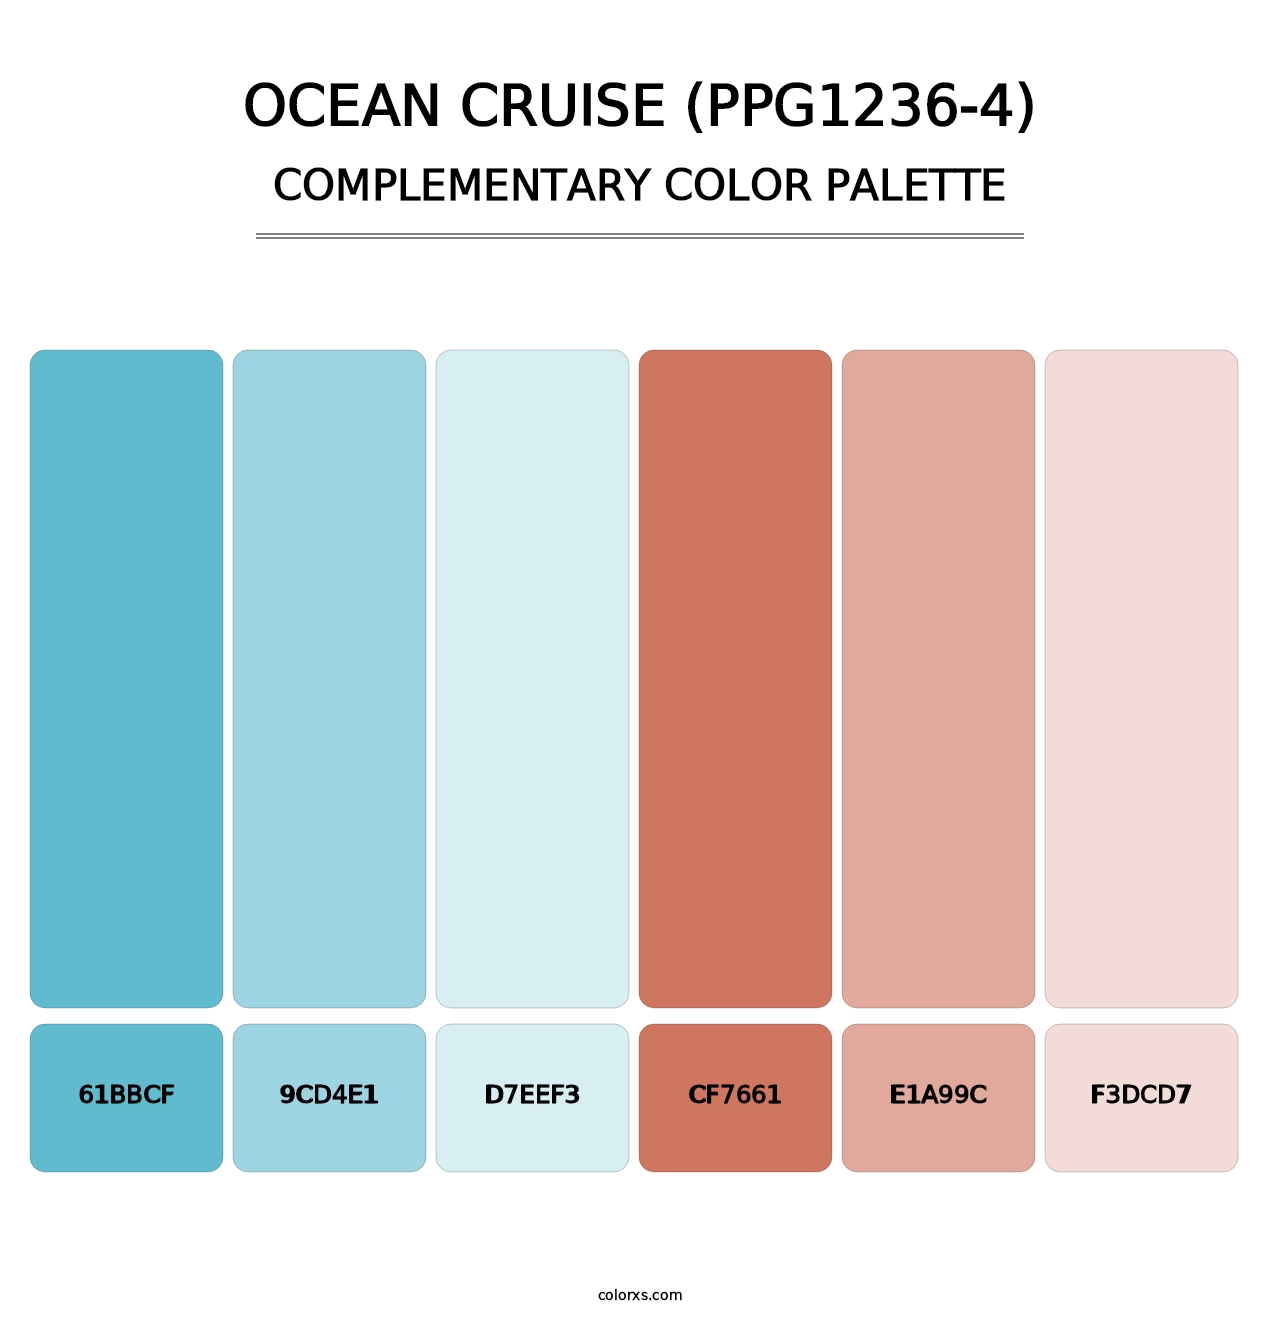 Ocean Cruise (PPG1236-4) - Complementary Color Palette